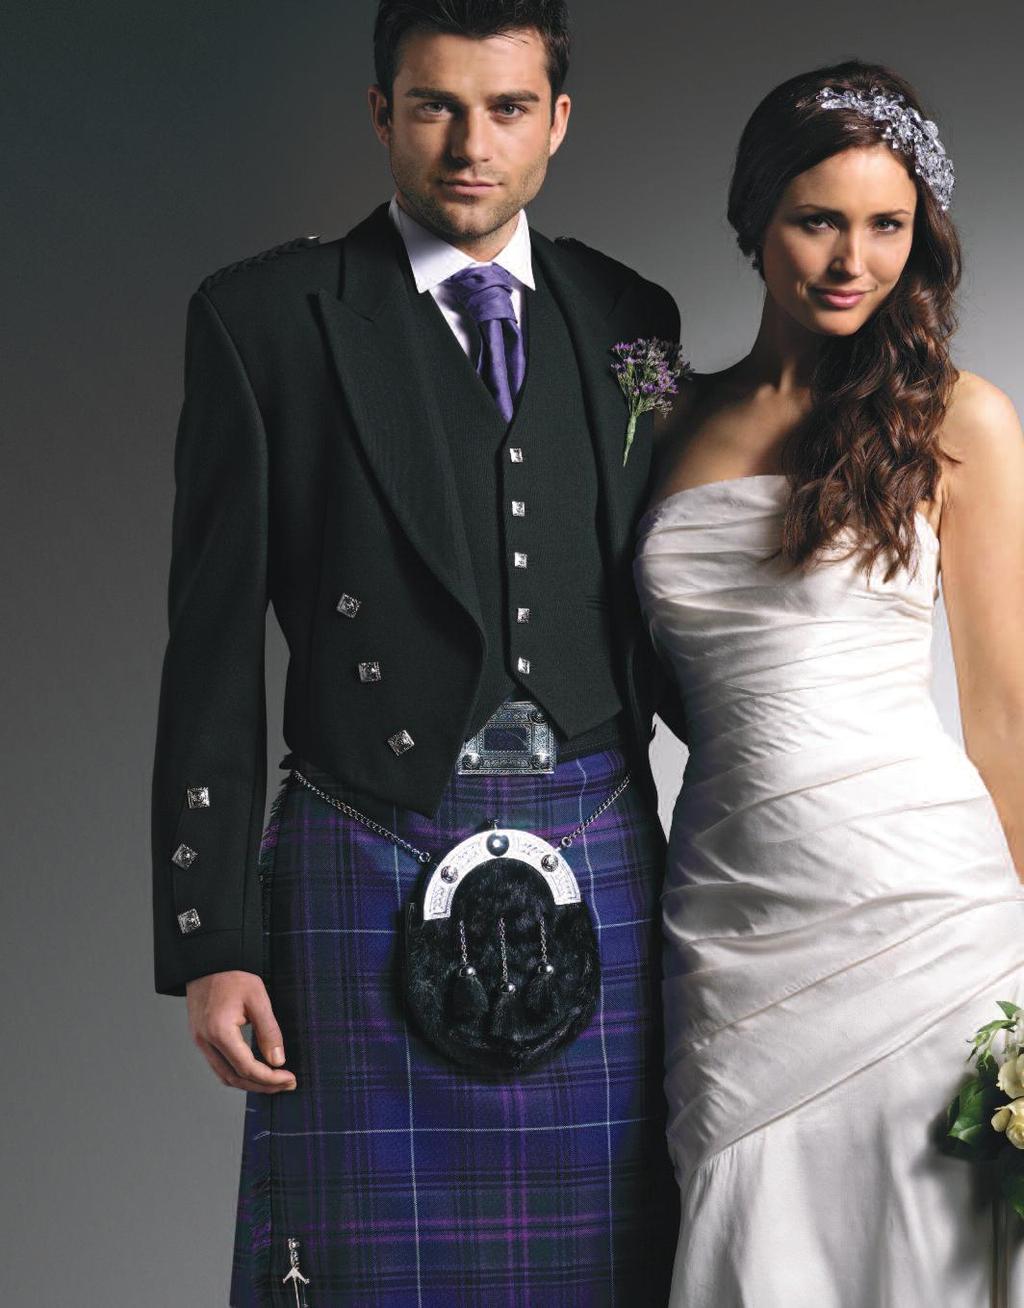 Contemporary Tartan Collection The Gilt Edged range of contemporary tartans gives an added edge to the classic